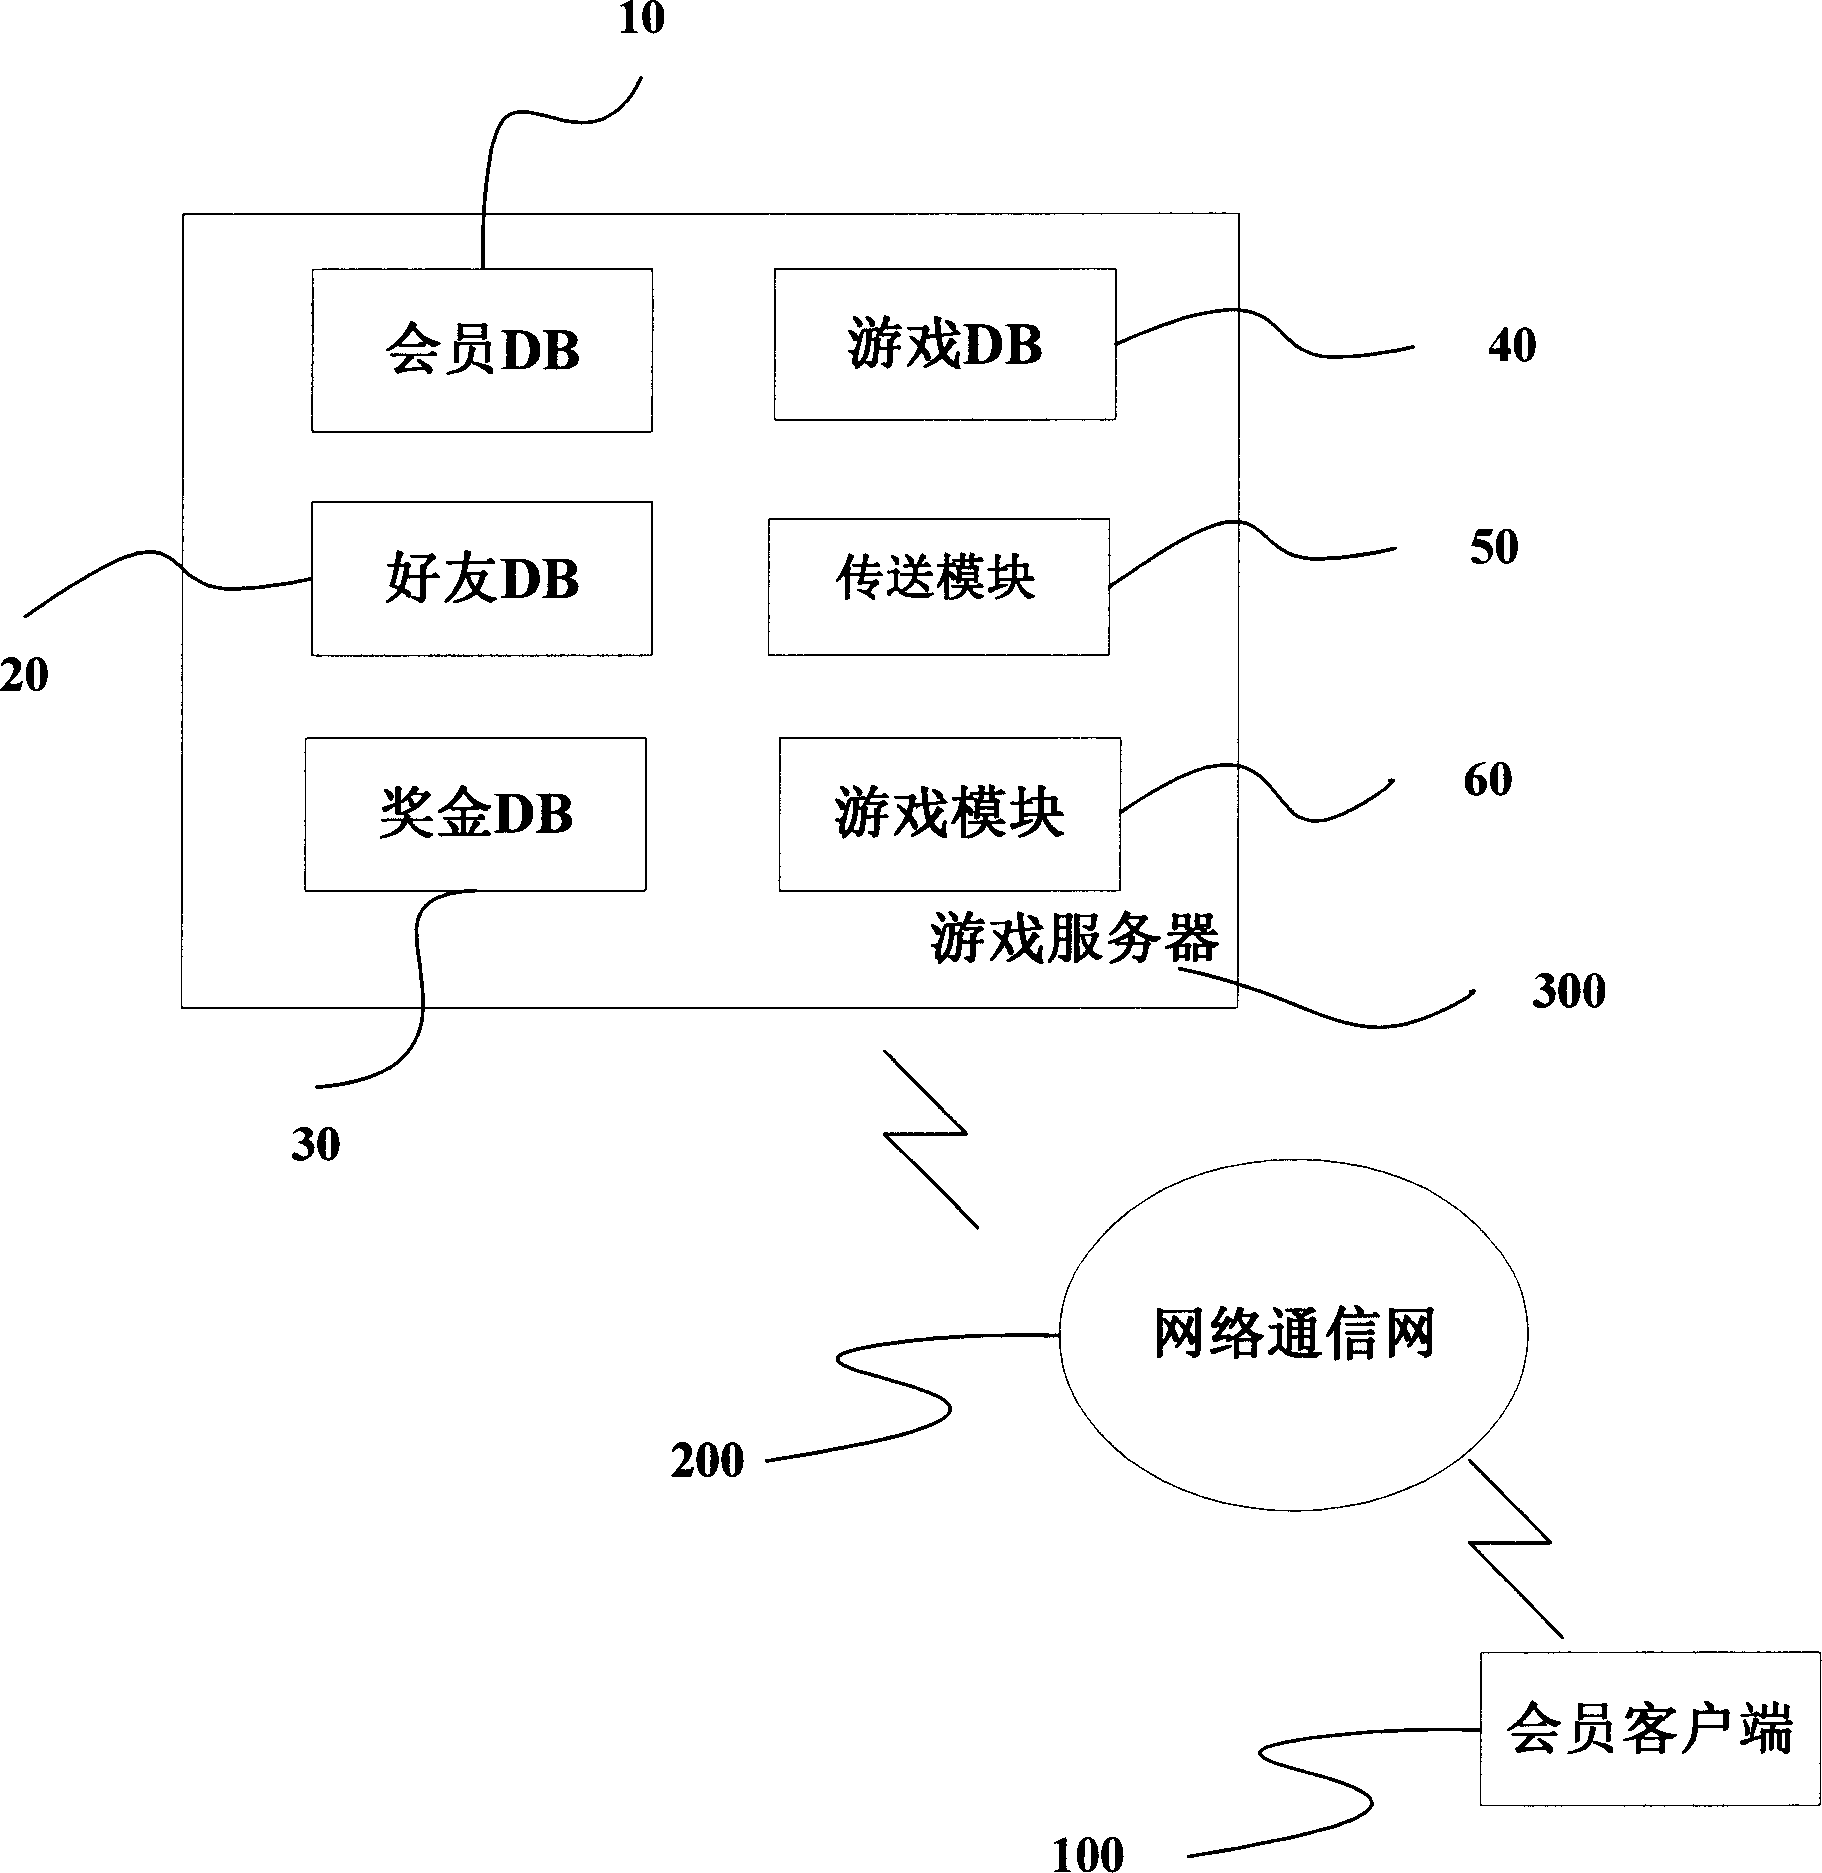 Method for activating communication and address list using games